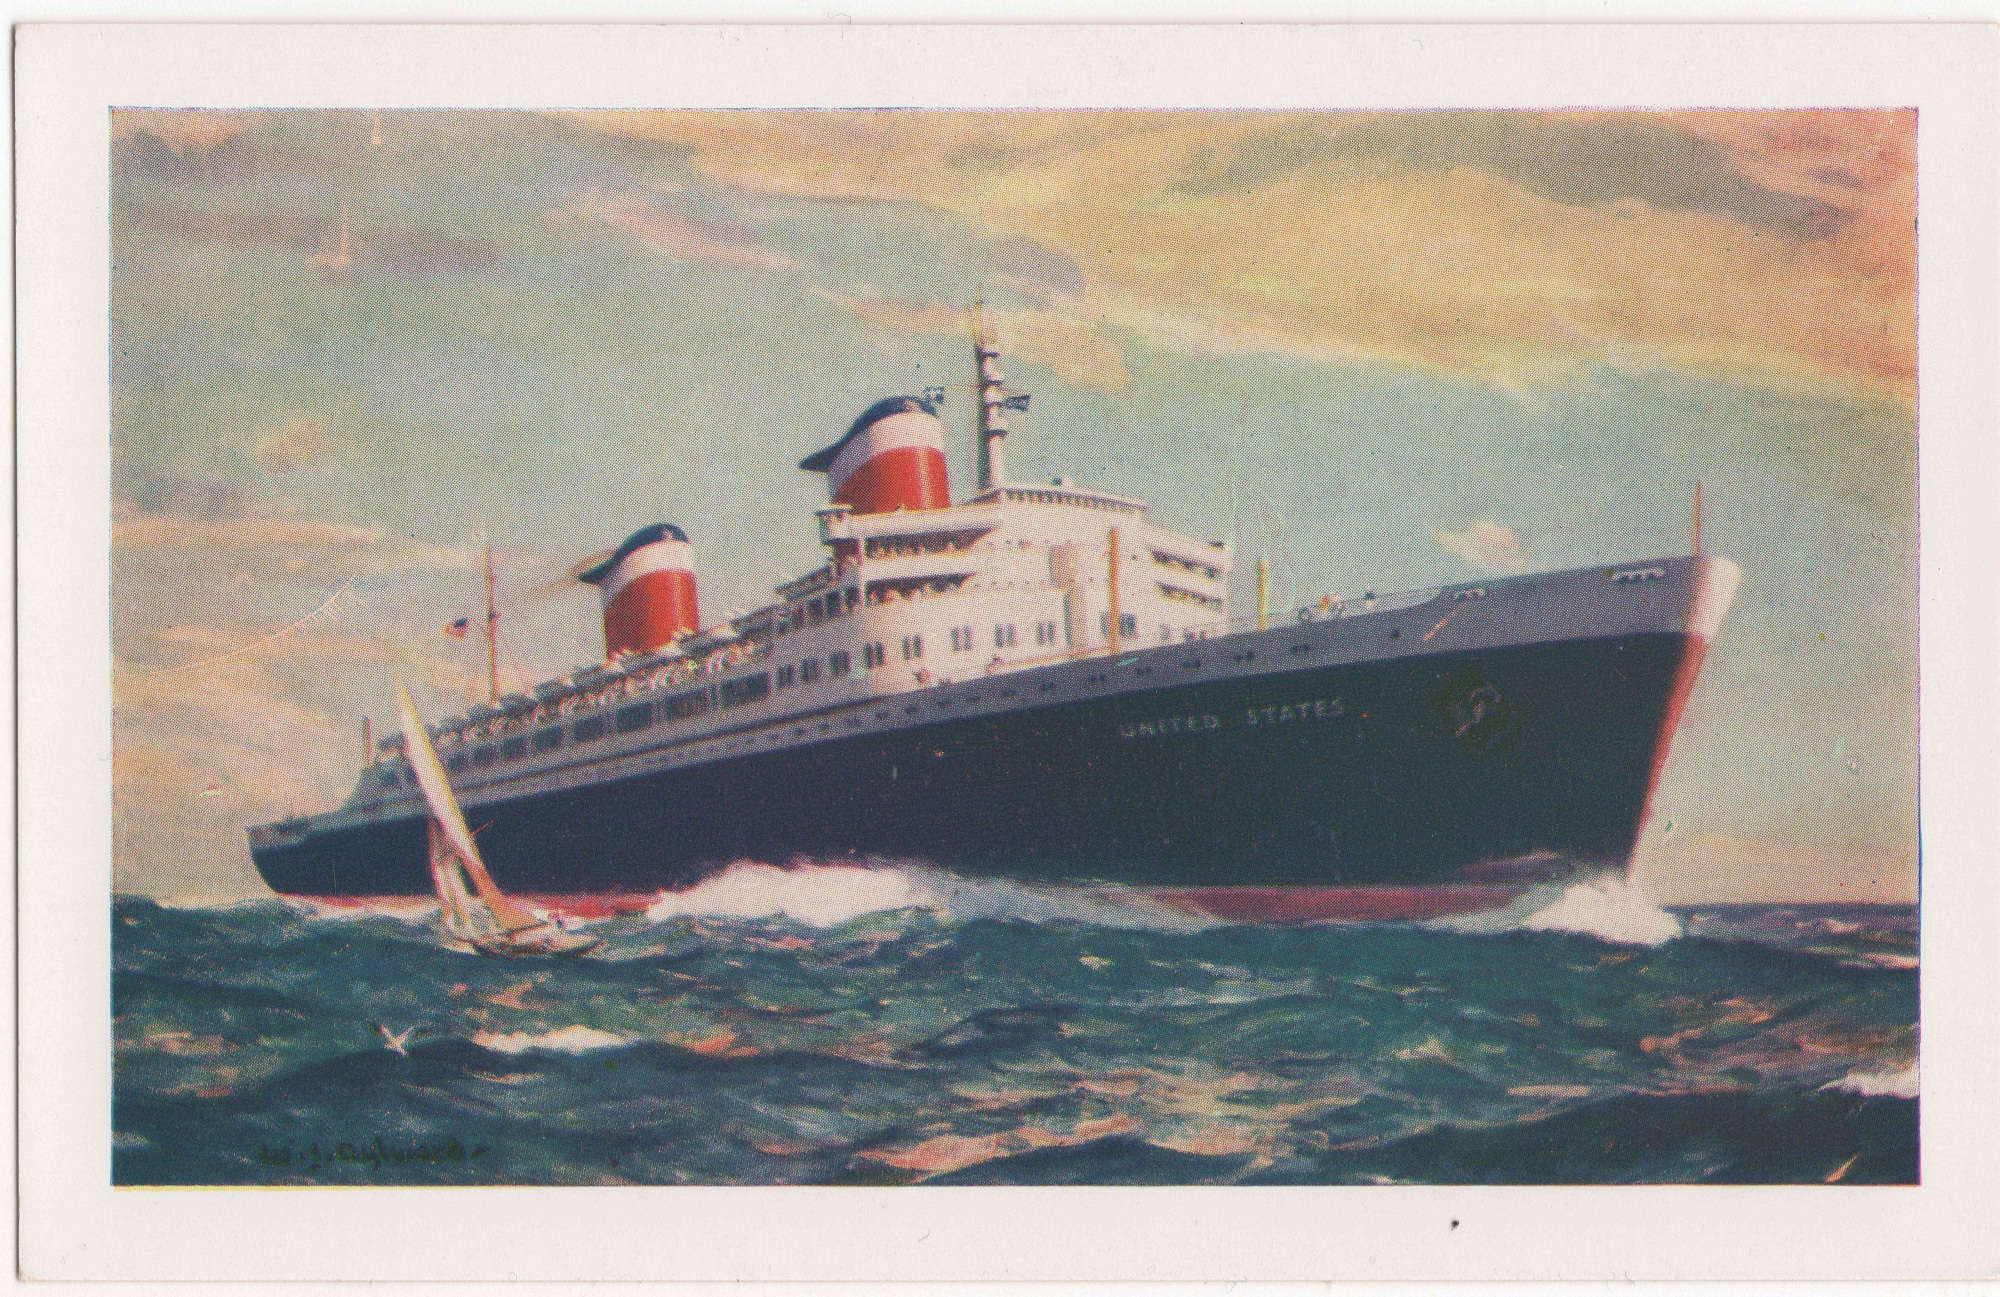 S.S. United States Postcard Front